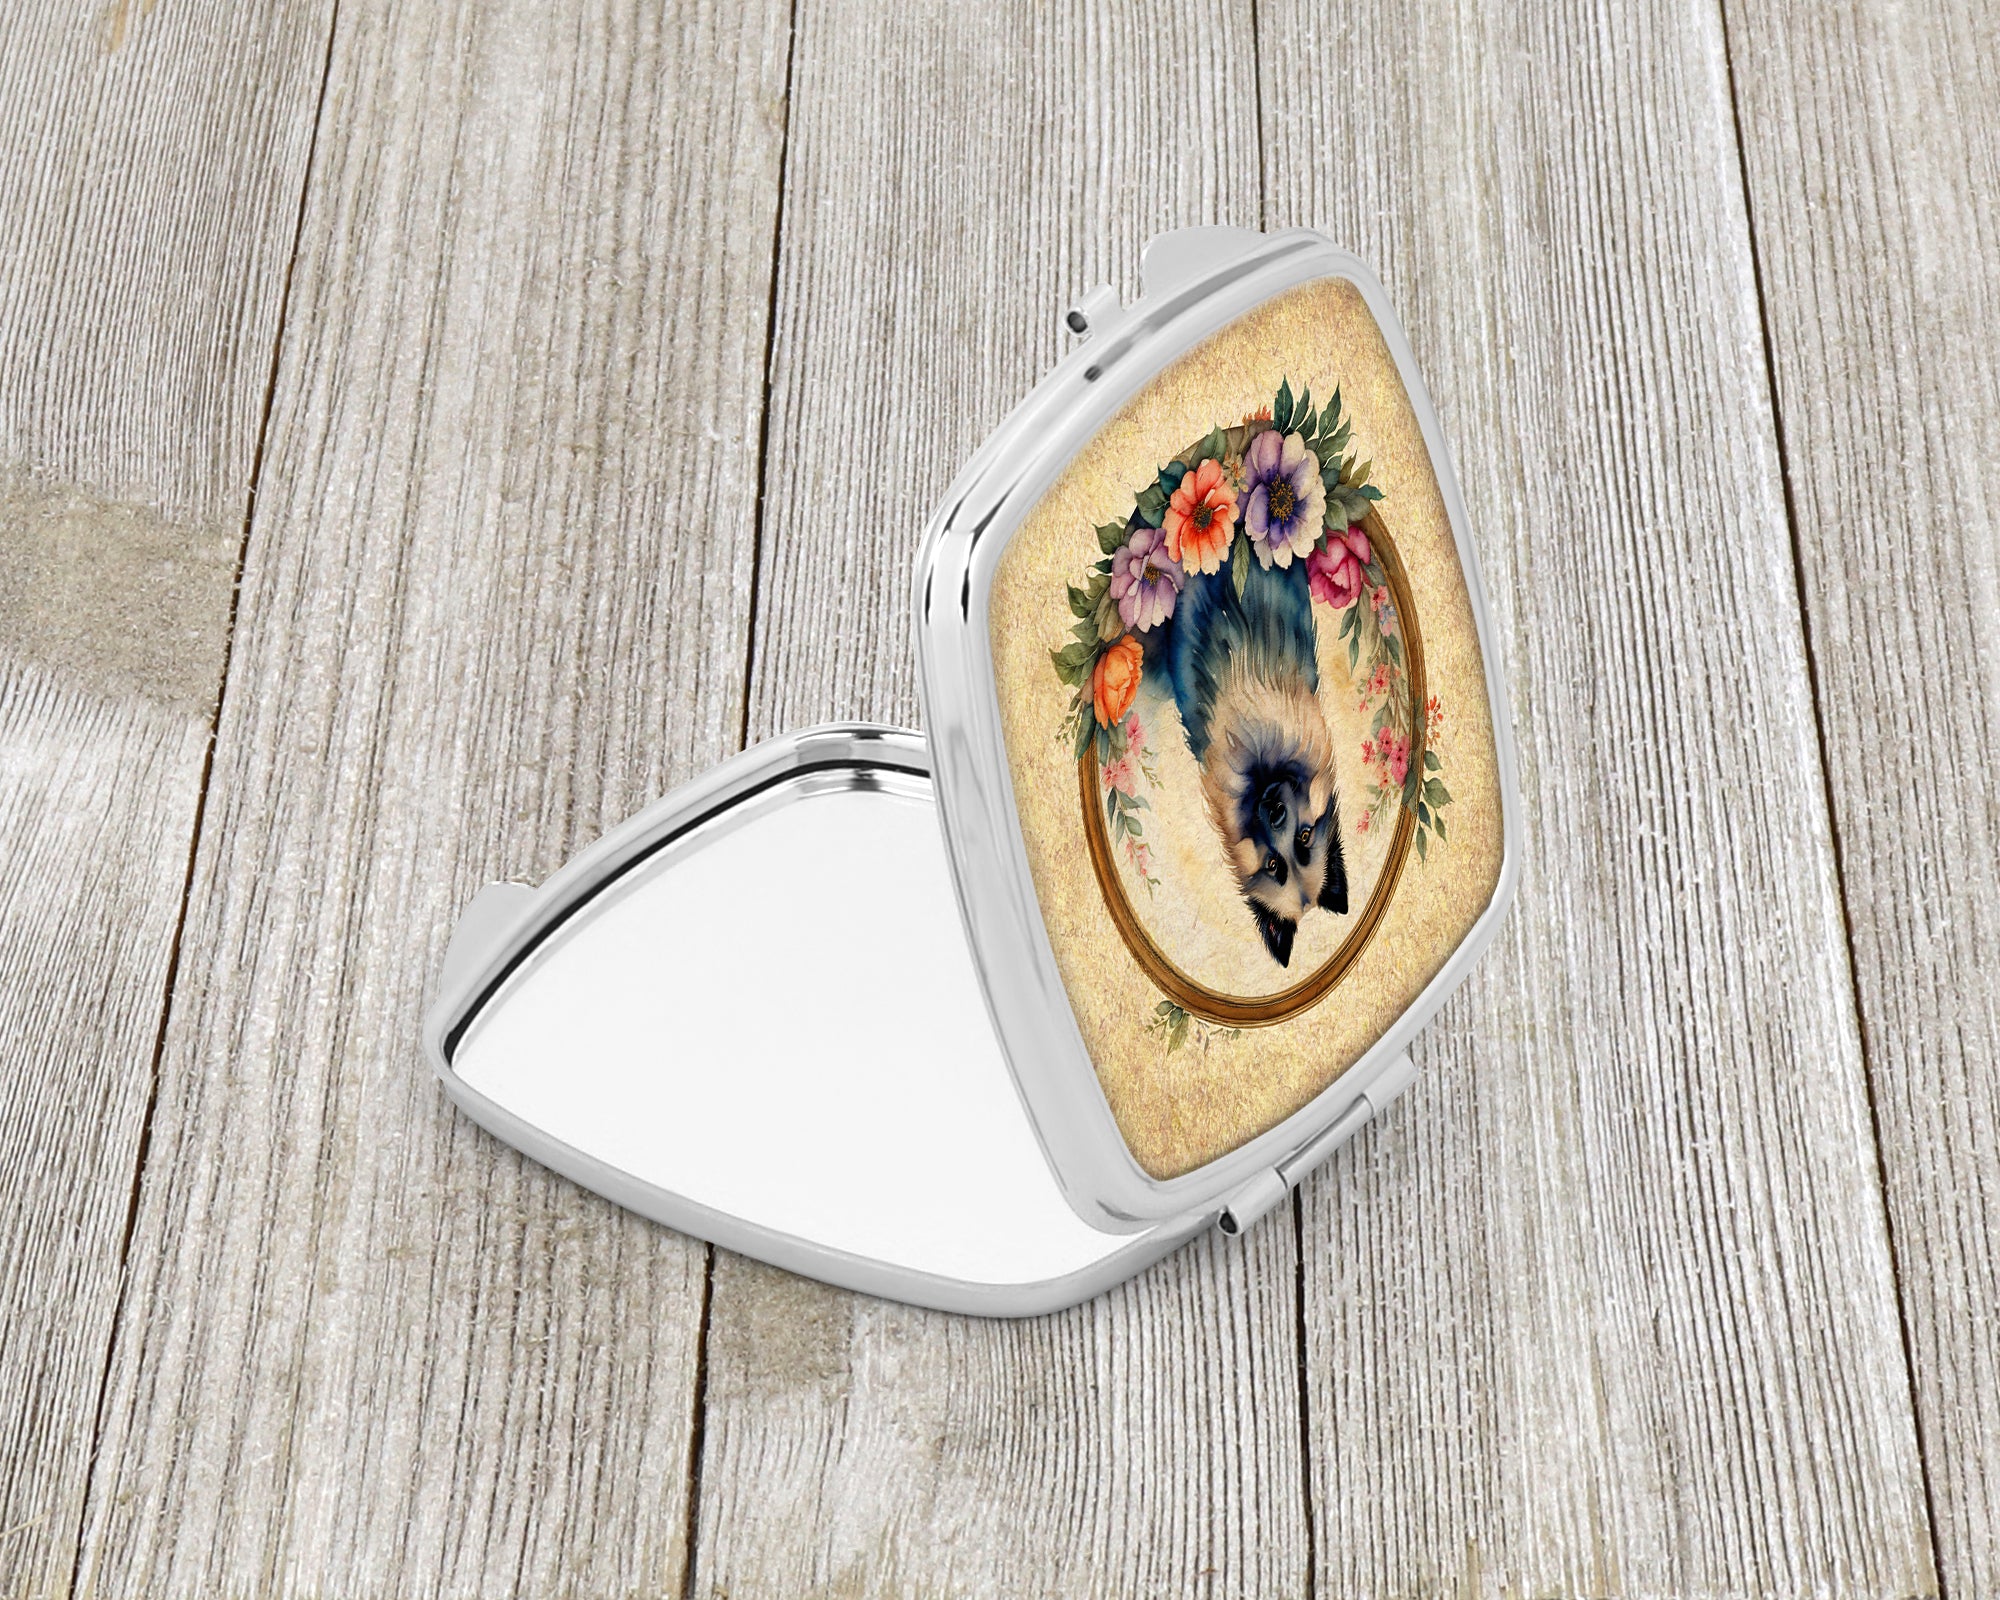 Buy this Keeshond and Flowers Compact Mirror